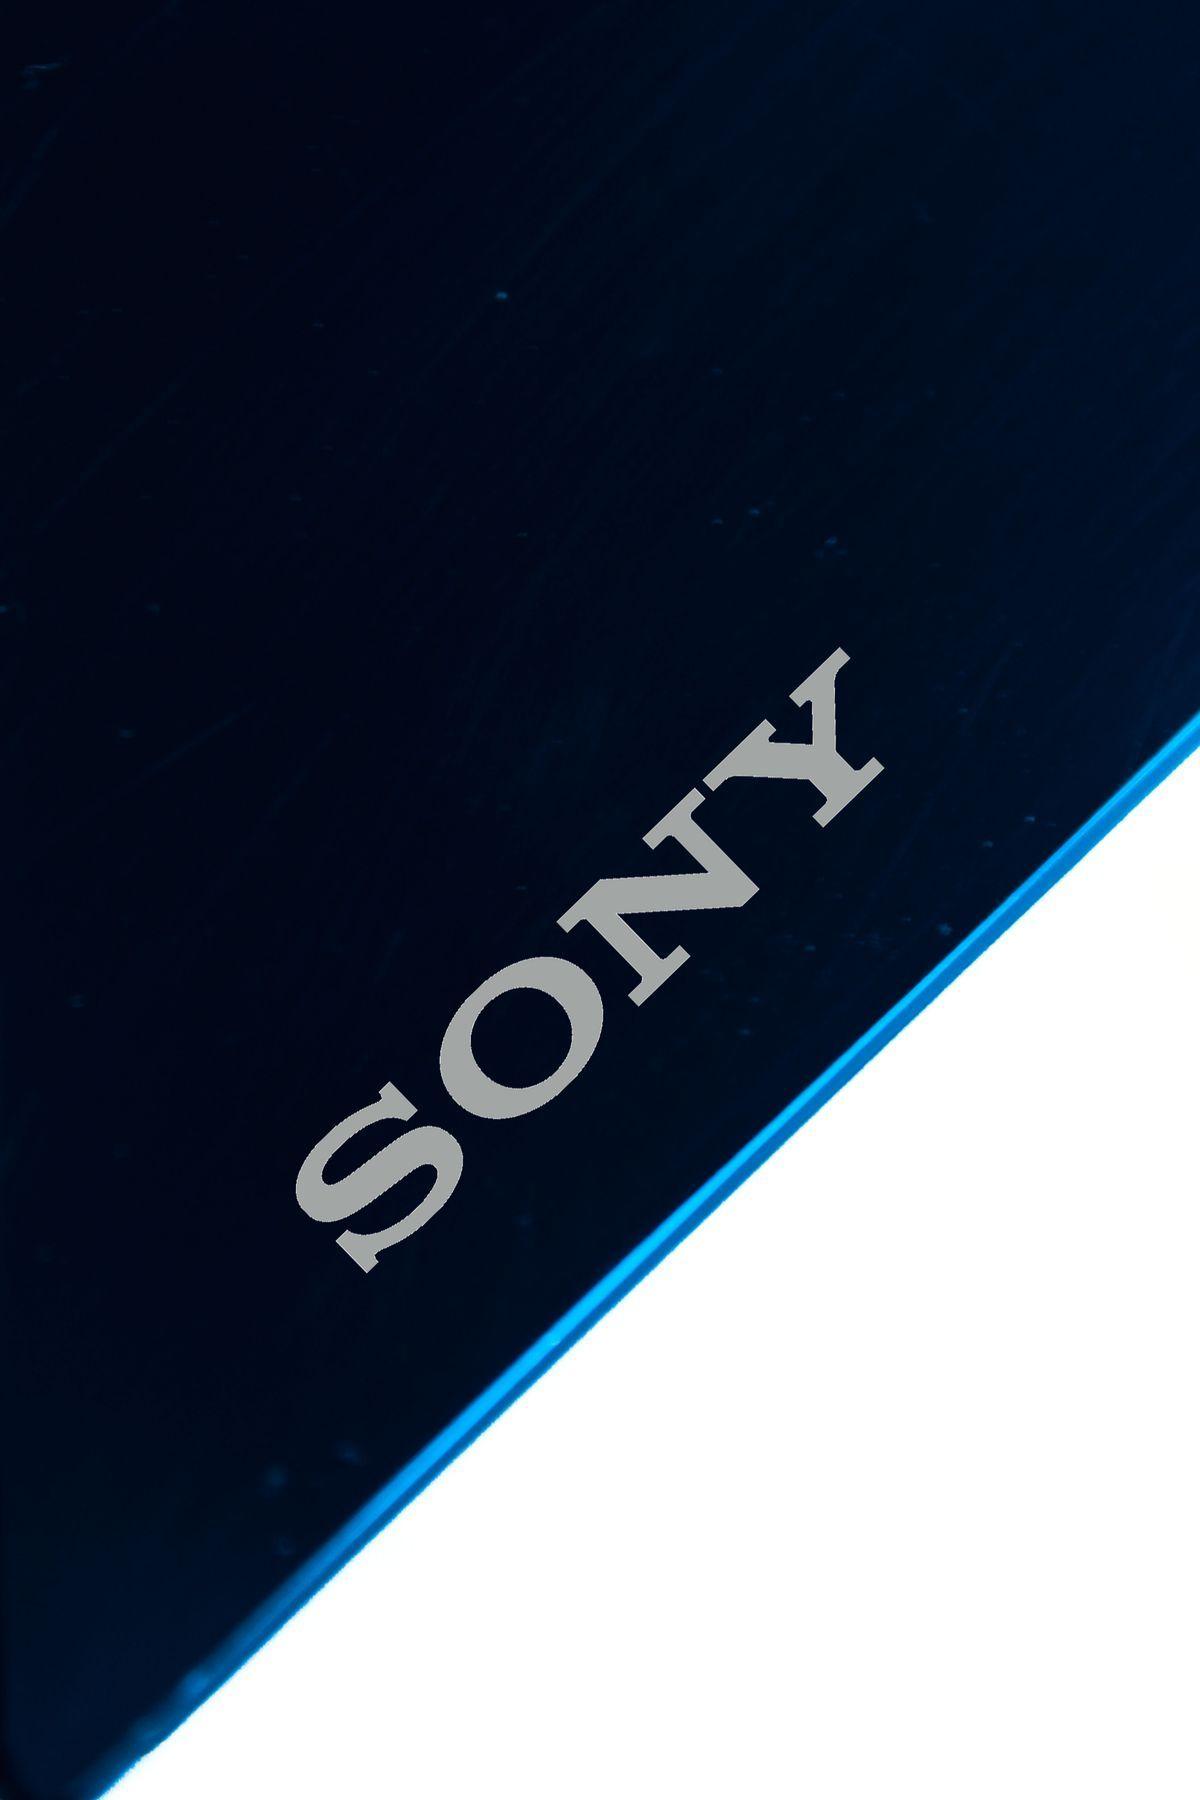 SONY XPERIA 10 IV WALLPAPERS